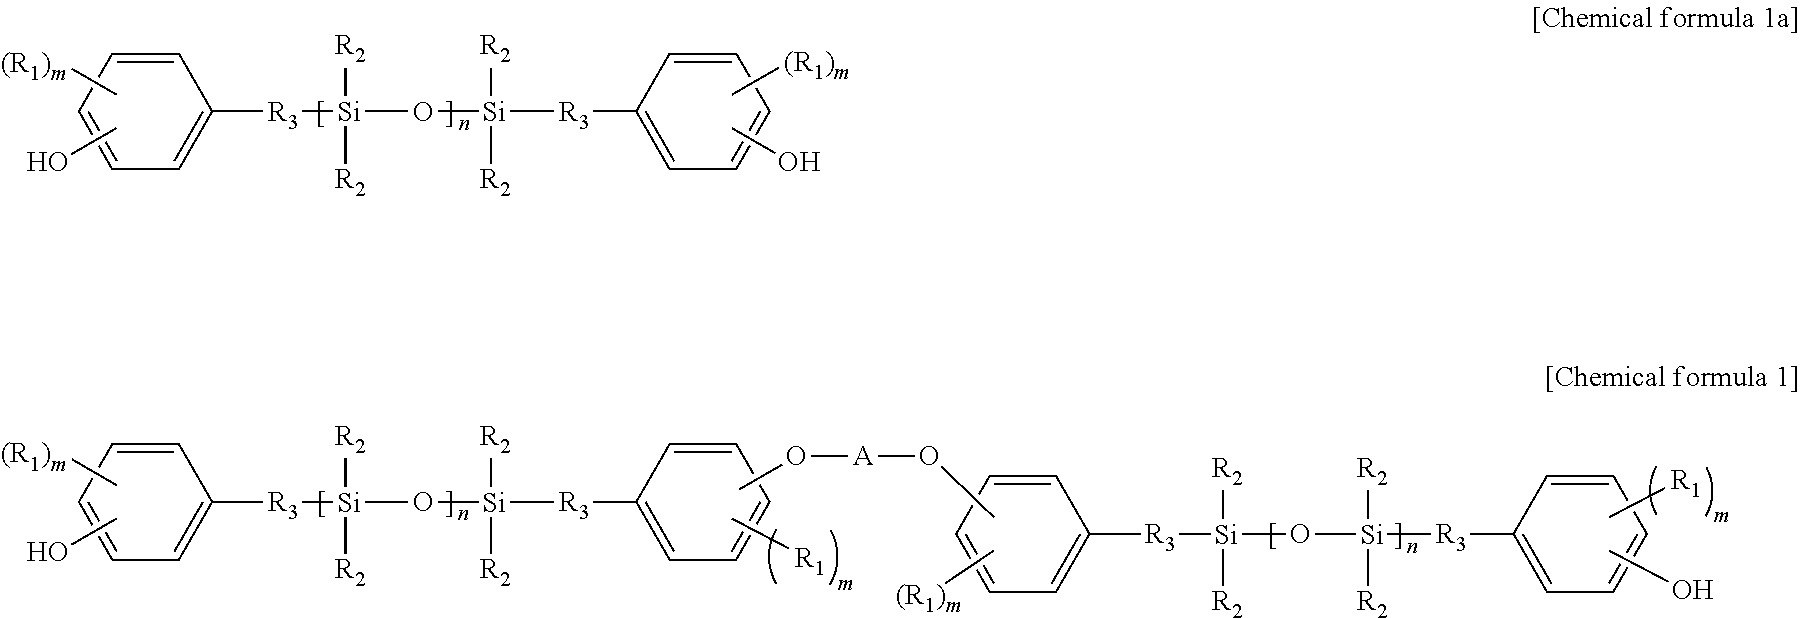 Polysiloxane-polycarbonate copolymer and method of manufacturing the same